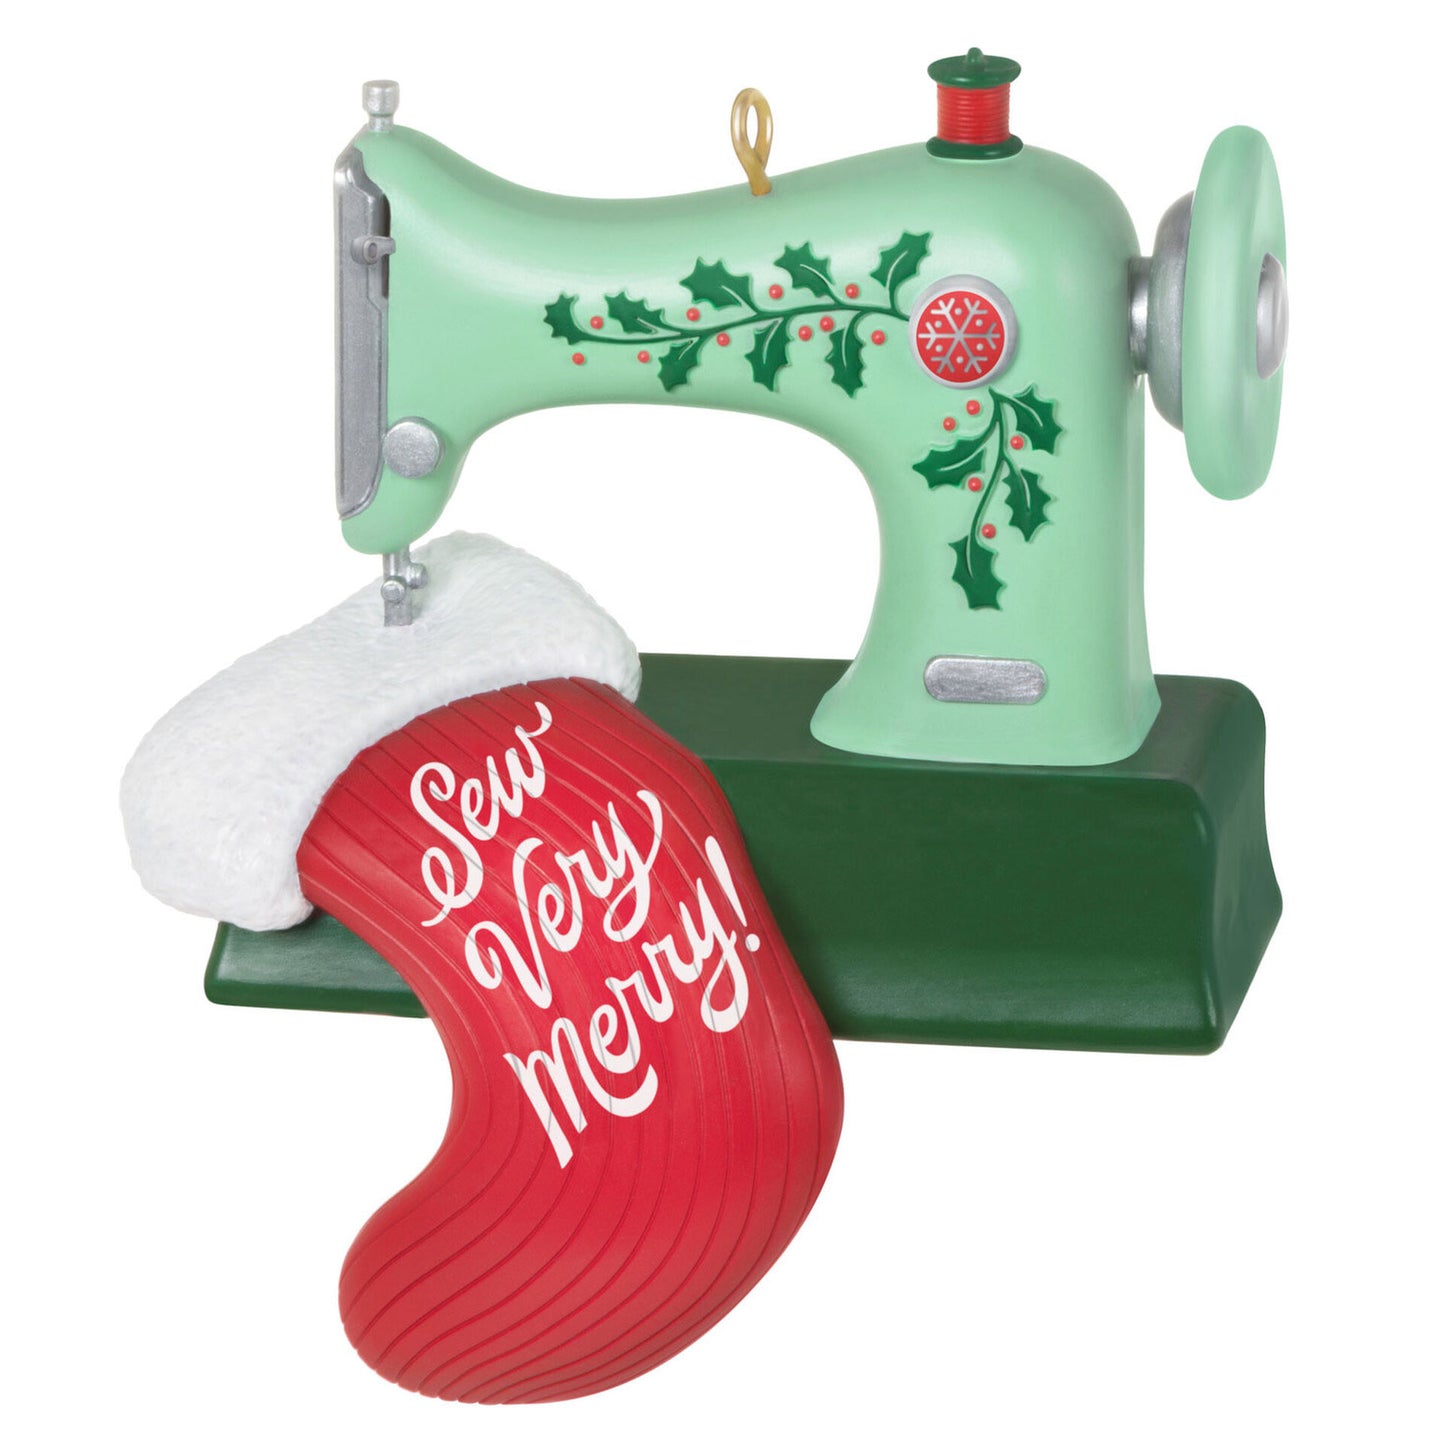 Christmas ornament depicting a green sewing machine with holly embellishments, sewing a red stocking with the words "Sew Very Merry!" sewn in white letters. 